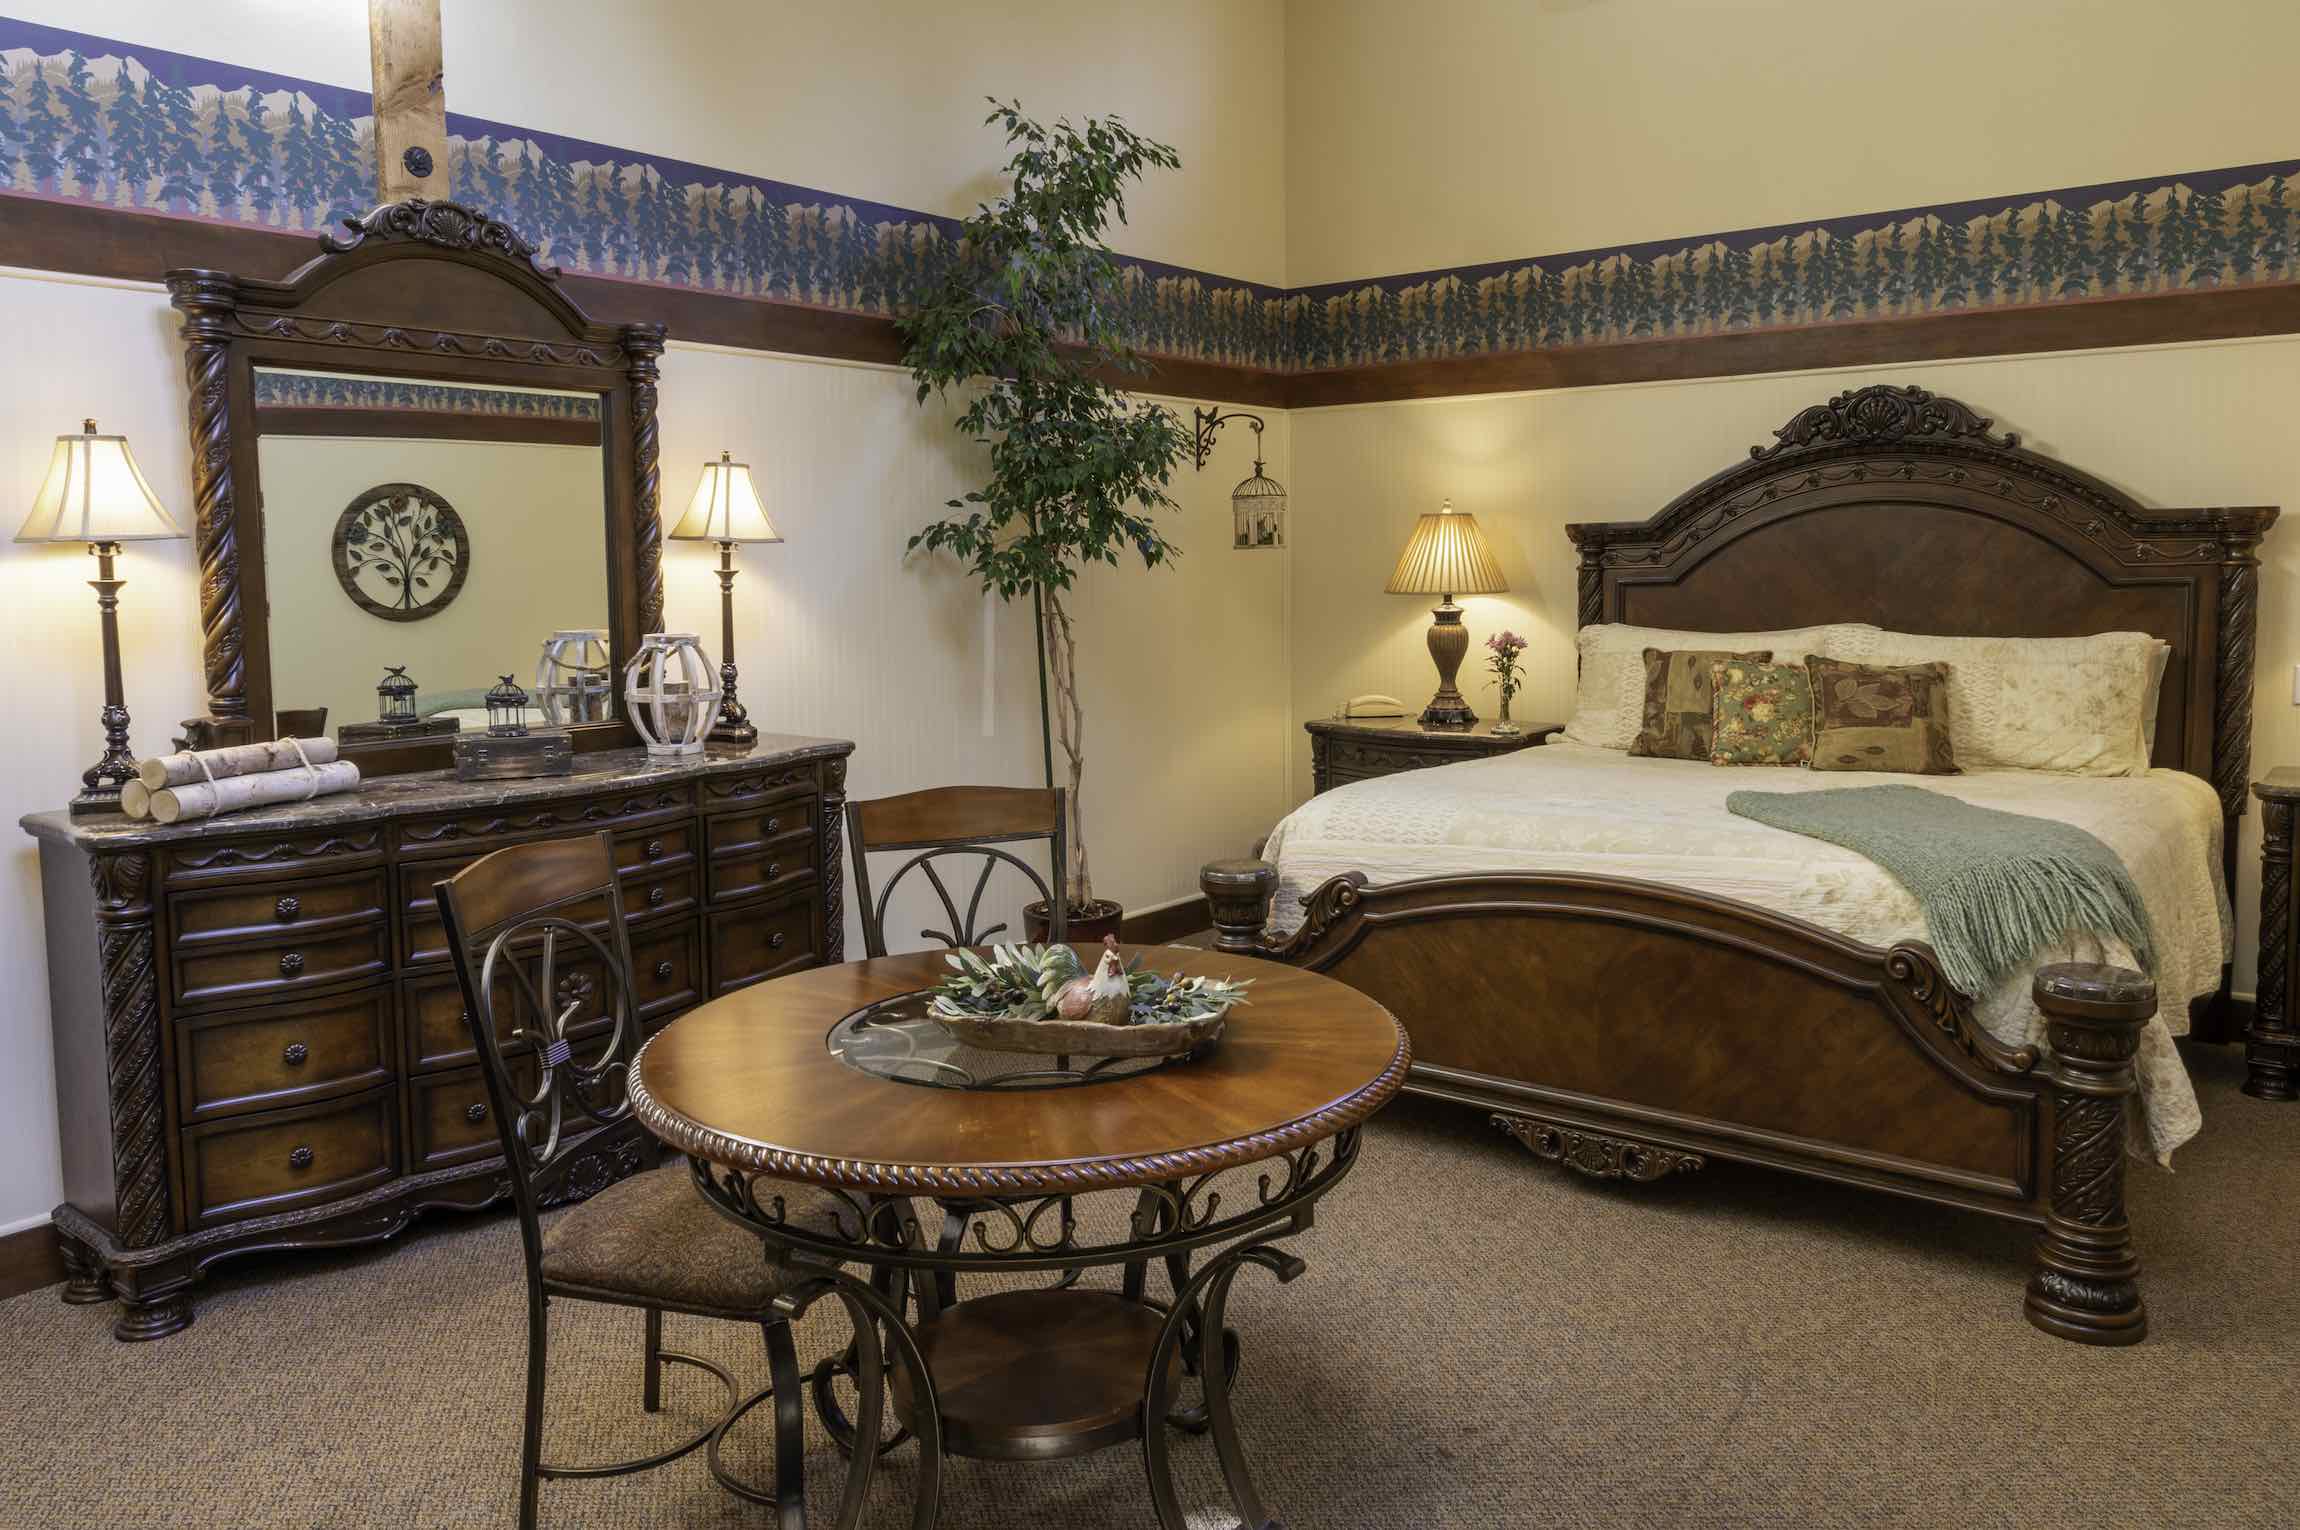 The Creekside Suite bedroom at Country Willows Inn & Estate in Ashland, Oregon has a private deck overlooking the mountains, and a cozy sitting area.